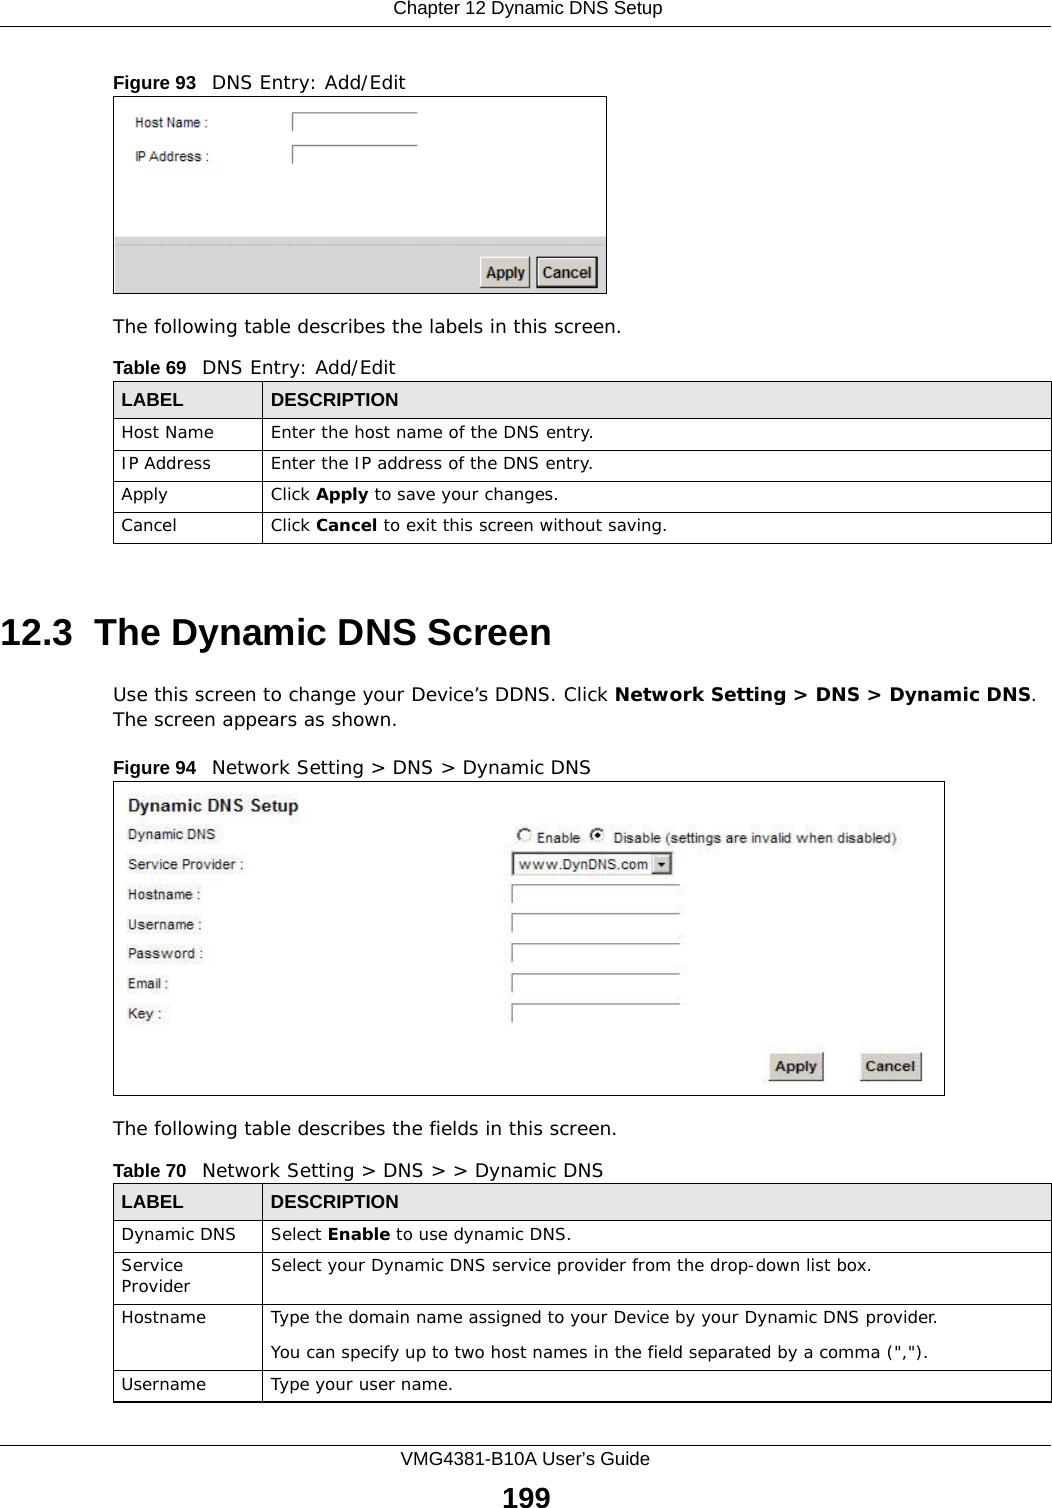  Chapter 12 Dynamic DNS SetupVMG4381-B10A User’s Guide199Figure 93   DNS Entry: Add/EditThe following table describes the labels in this screen. 12.3  The Dynamic DNS ScreenUse this screen to change your Device’s DDNS. Click Network Setting &gt; DNS &gt; Dynamic DNS. The screen appears as shown.Figure 94   Network Setting &gt; DNS &gt; Dynamic DNSThe following table describes the fields in this screen. Table 69   DNS Entry: Add/EditLABEL DESCRIPTIONHost Name Enter the host name of the DNS entry.IP Address Enter the IP address of the DNS entry.Apply Click Apply to save your changes.Cancel Click Cancel to exit this screen without saving.Table 70   Network Setting &gt; DNS &gt; &gt; Dynamic DNSLABEL DESCRIPTIONDynamic DNS Select Enable to use dynamic DNS.Service Provider Select your Dynamic DNS service provider from the drop-down list box.Hostname Type the domain name assigned to your Device by your Dynamic DNS provider.You can specify up to two host names in the field separated by a comma (&quot;,&quot;).Username Type your user name.